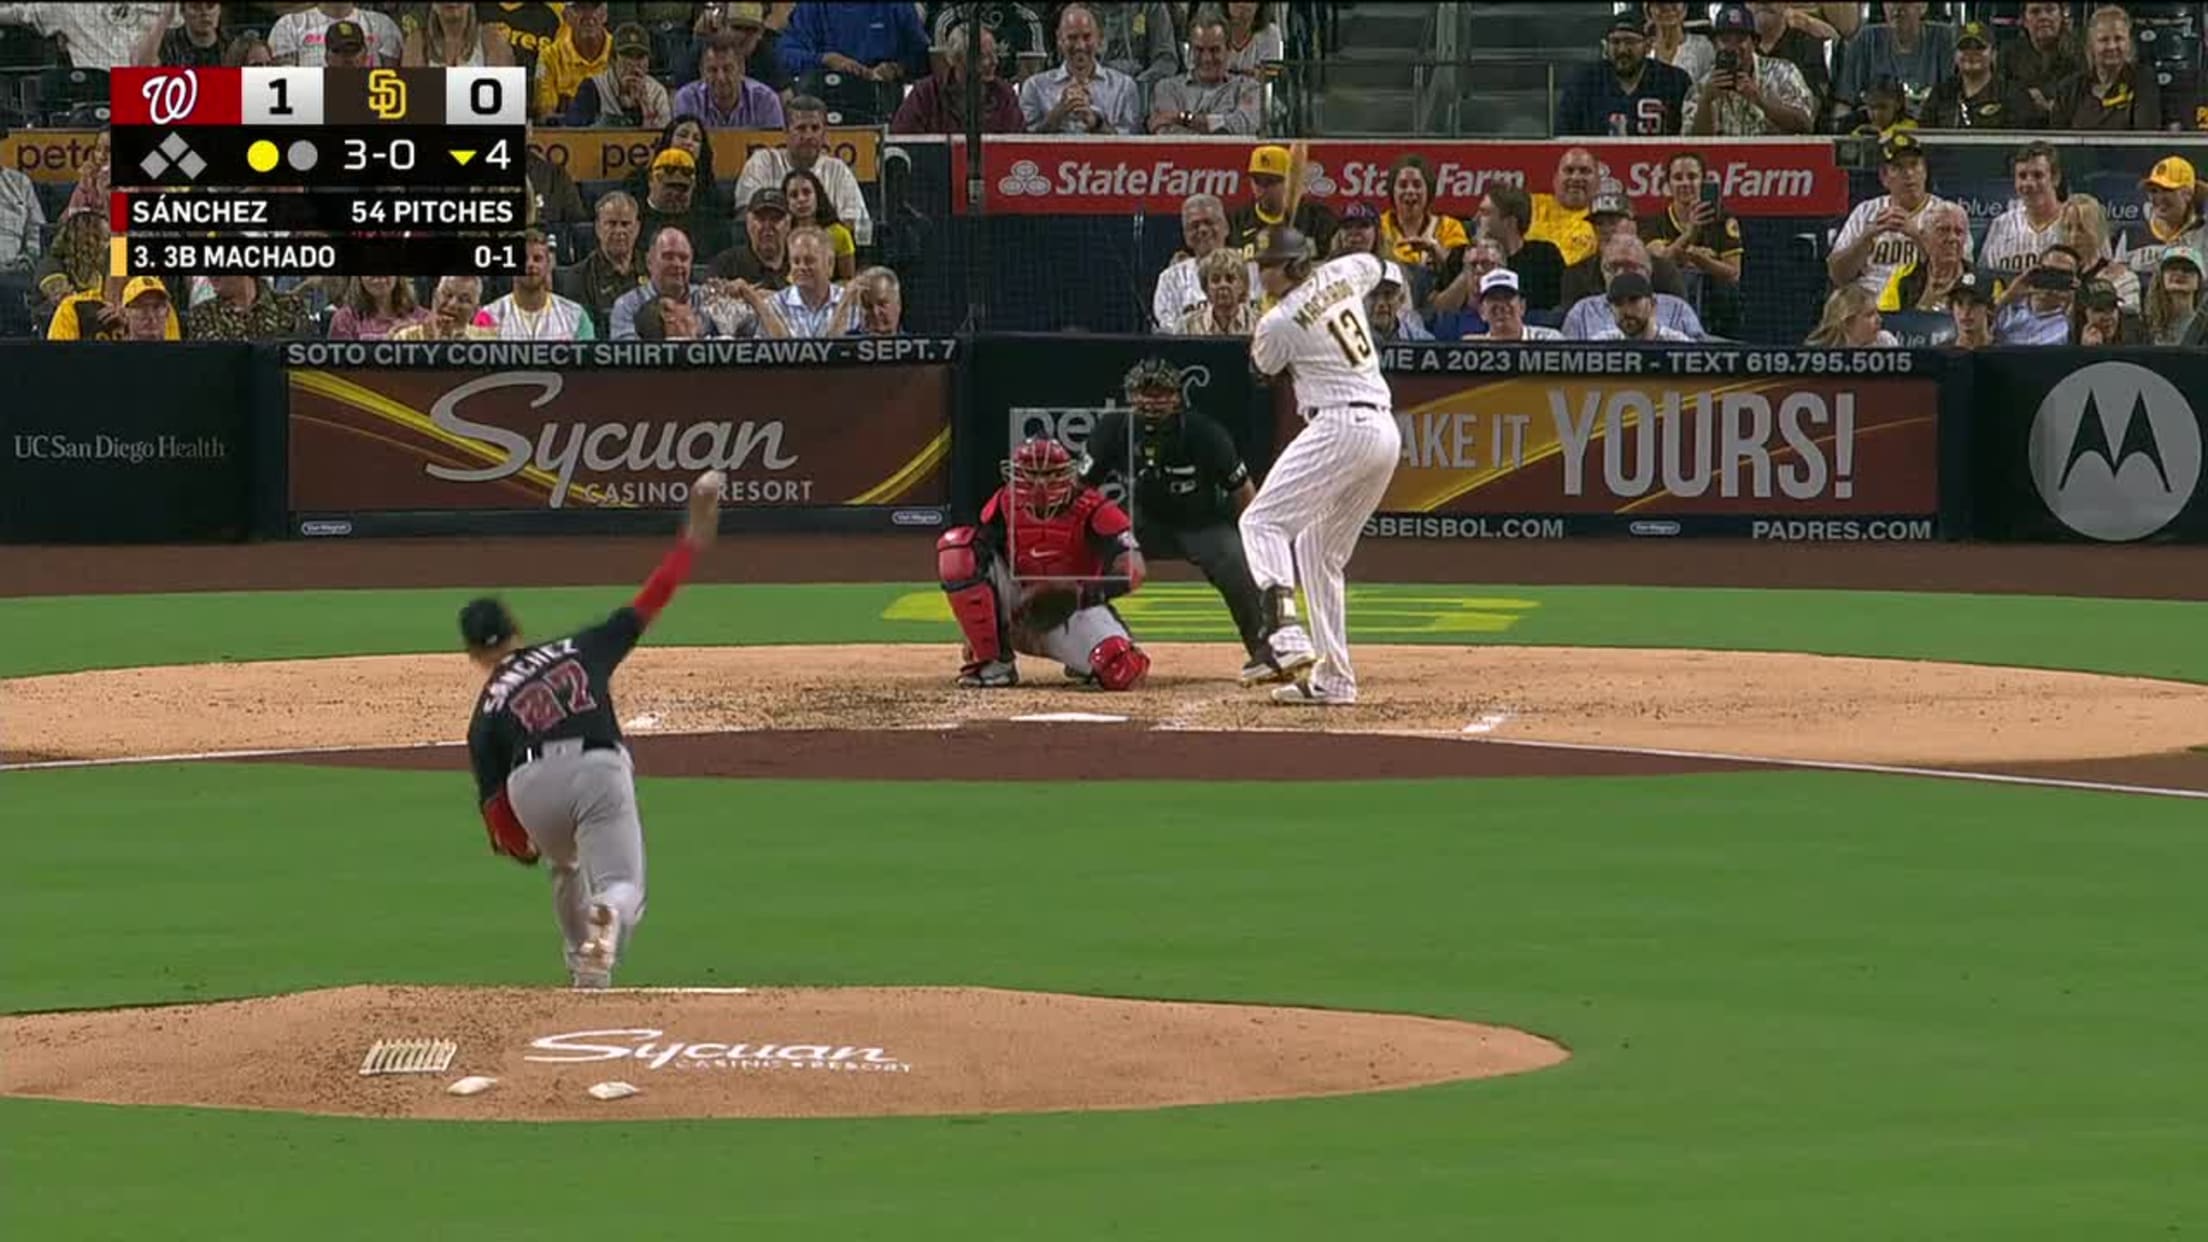 Manny Machado connects on towering 437-foot HR - ESPN Video